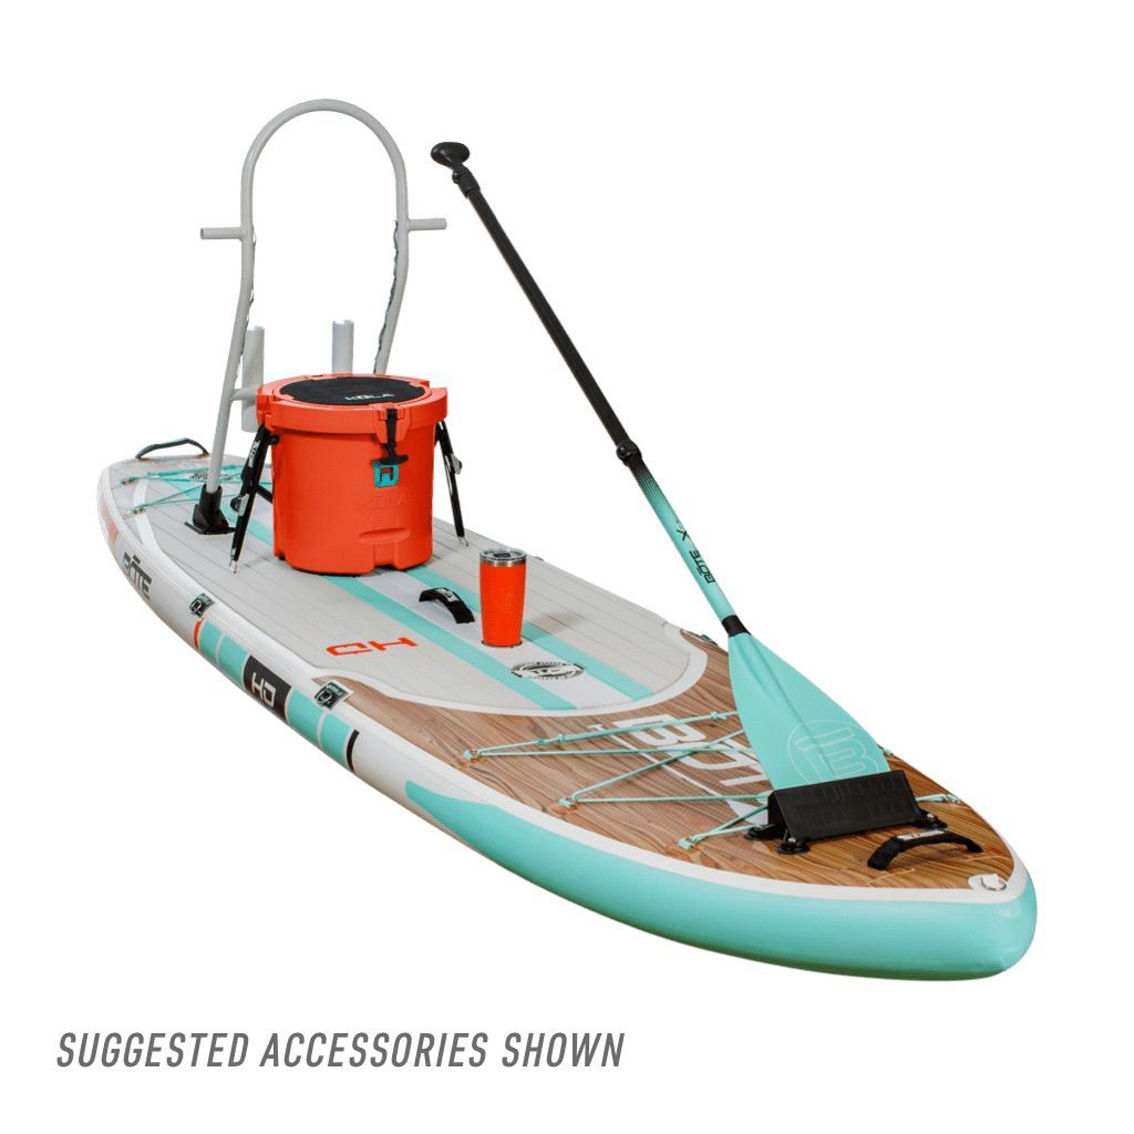 BOTE SUP HD Aero 11 FT 6 Inch Inflatable Stand Up Paddle Board - Image 3 of 5